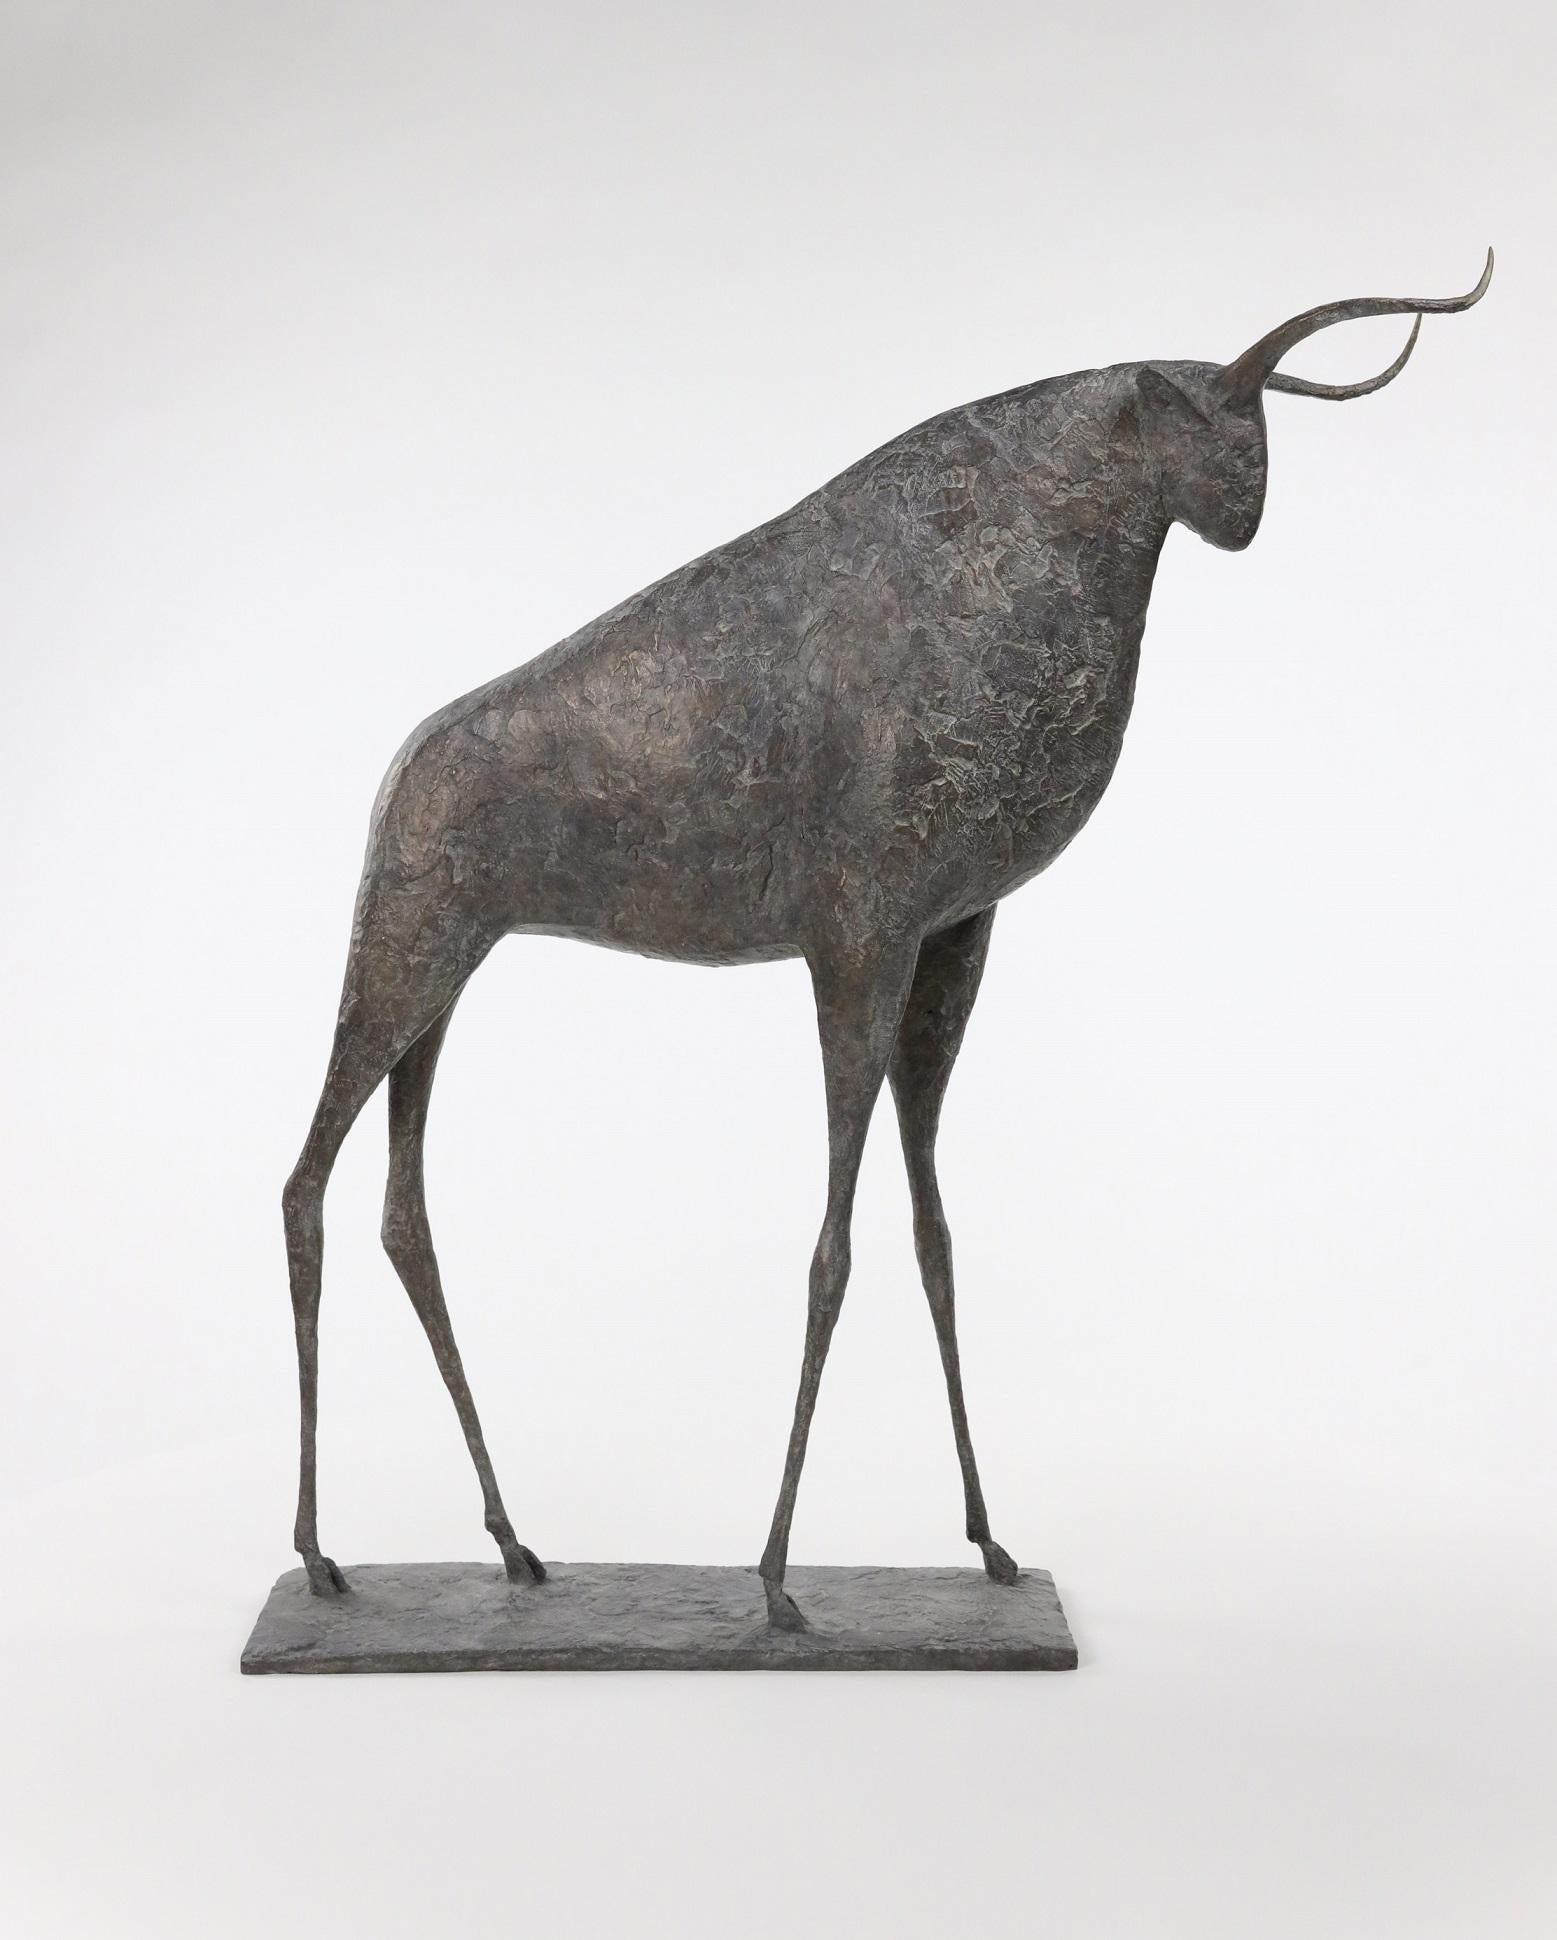 Bull IX is a bronze sculpture by French contemporary artist Pierre Yermia, dimensions are 66 × 60 × 15 cm (26 × 23.6 × 5.9 in). 
The sculpture is signed and numbered, it is part of a limited edition of 8 editions + 4 artist’s proofs, and comes with